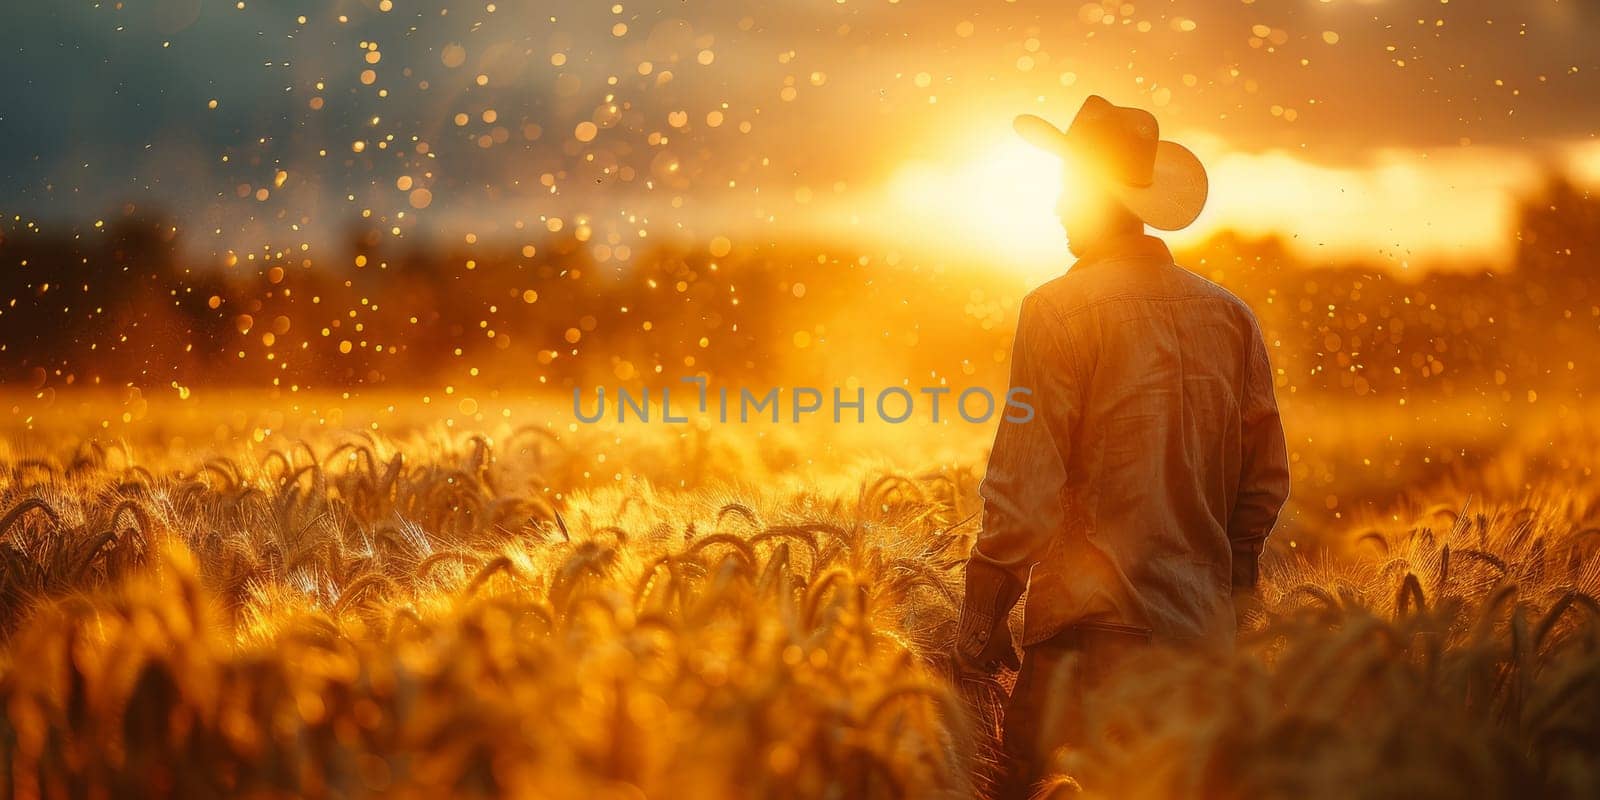 Farmer agriculture work hard young wheat in the field, the concept of natural farming, agriculture, the worker touches the crop and checks the sprouts, protect the ecology of the cultivated.